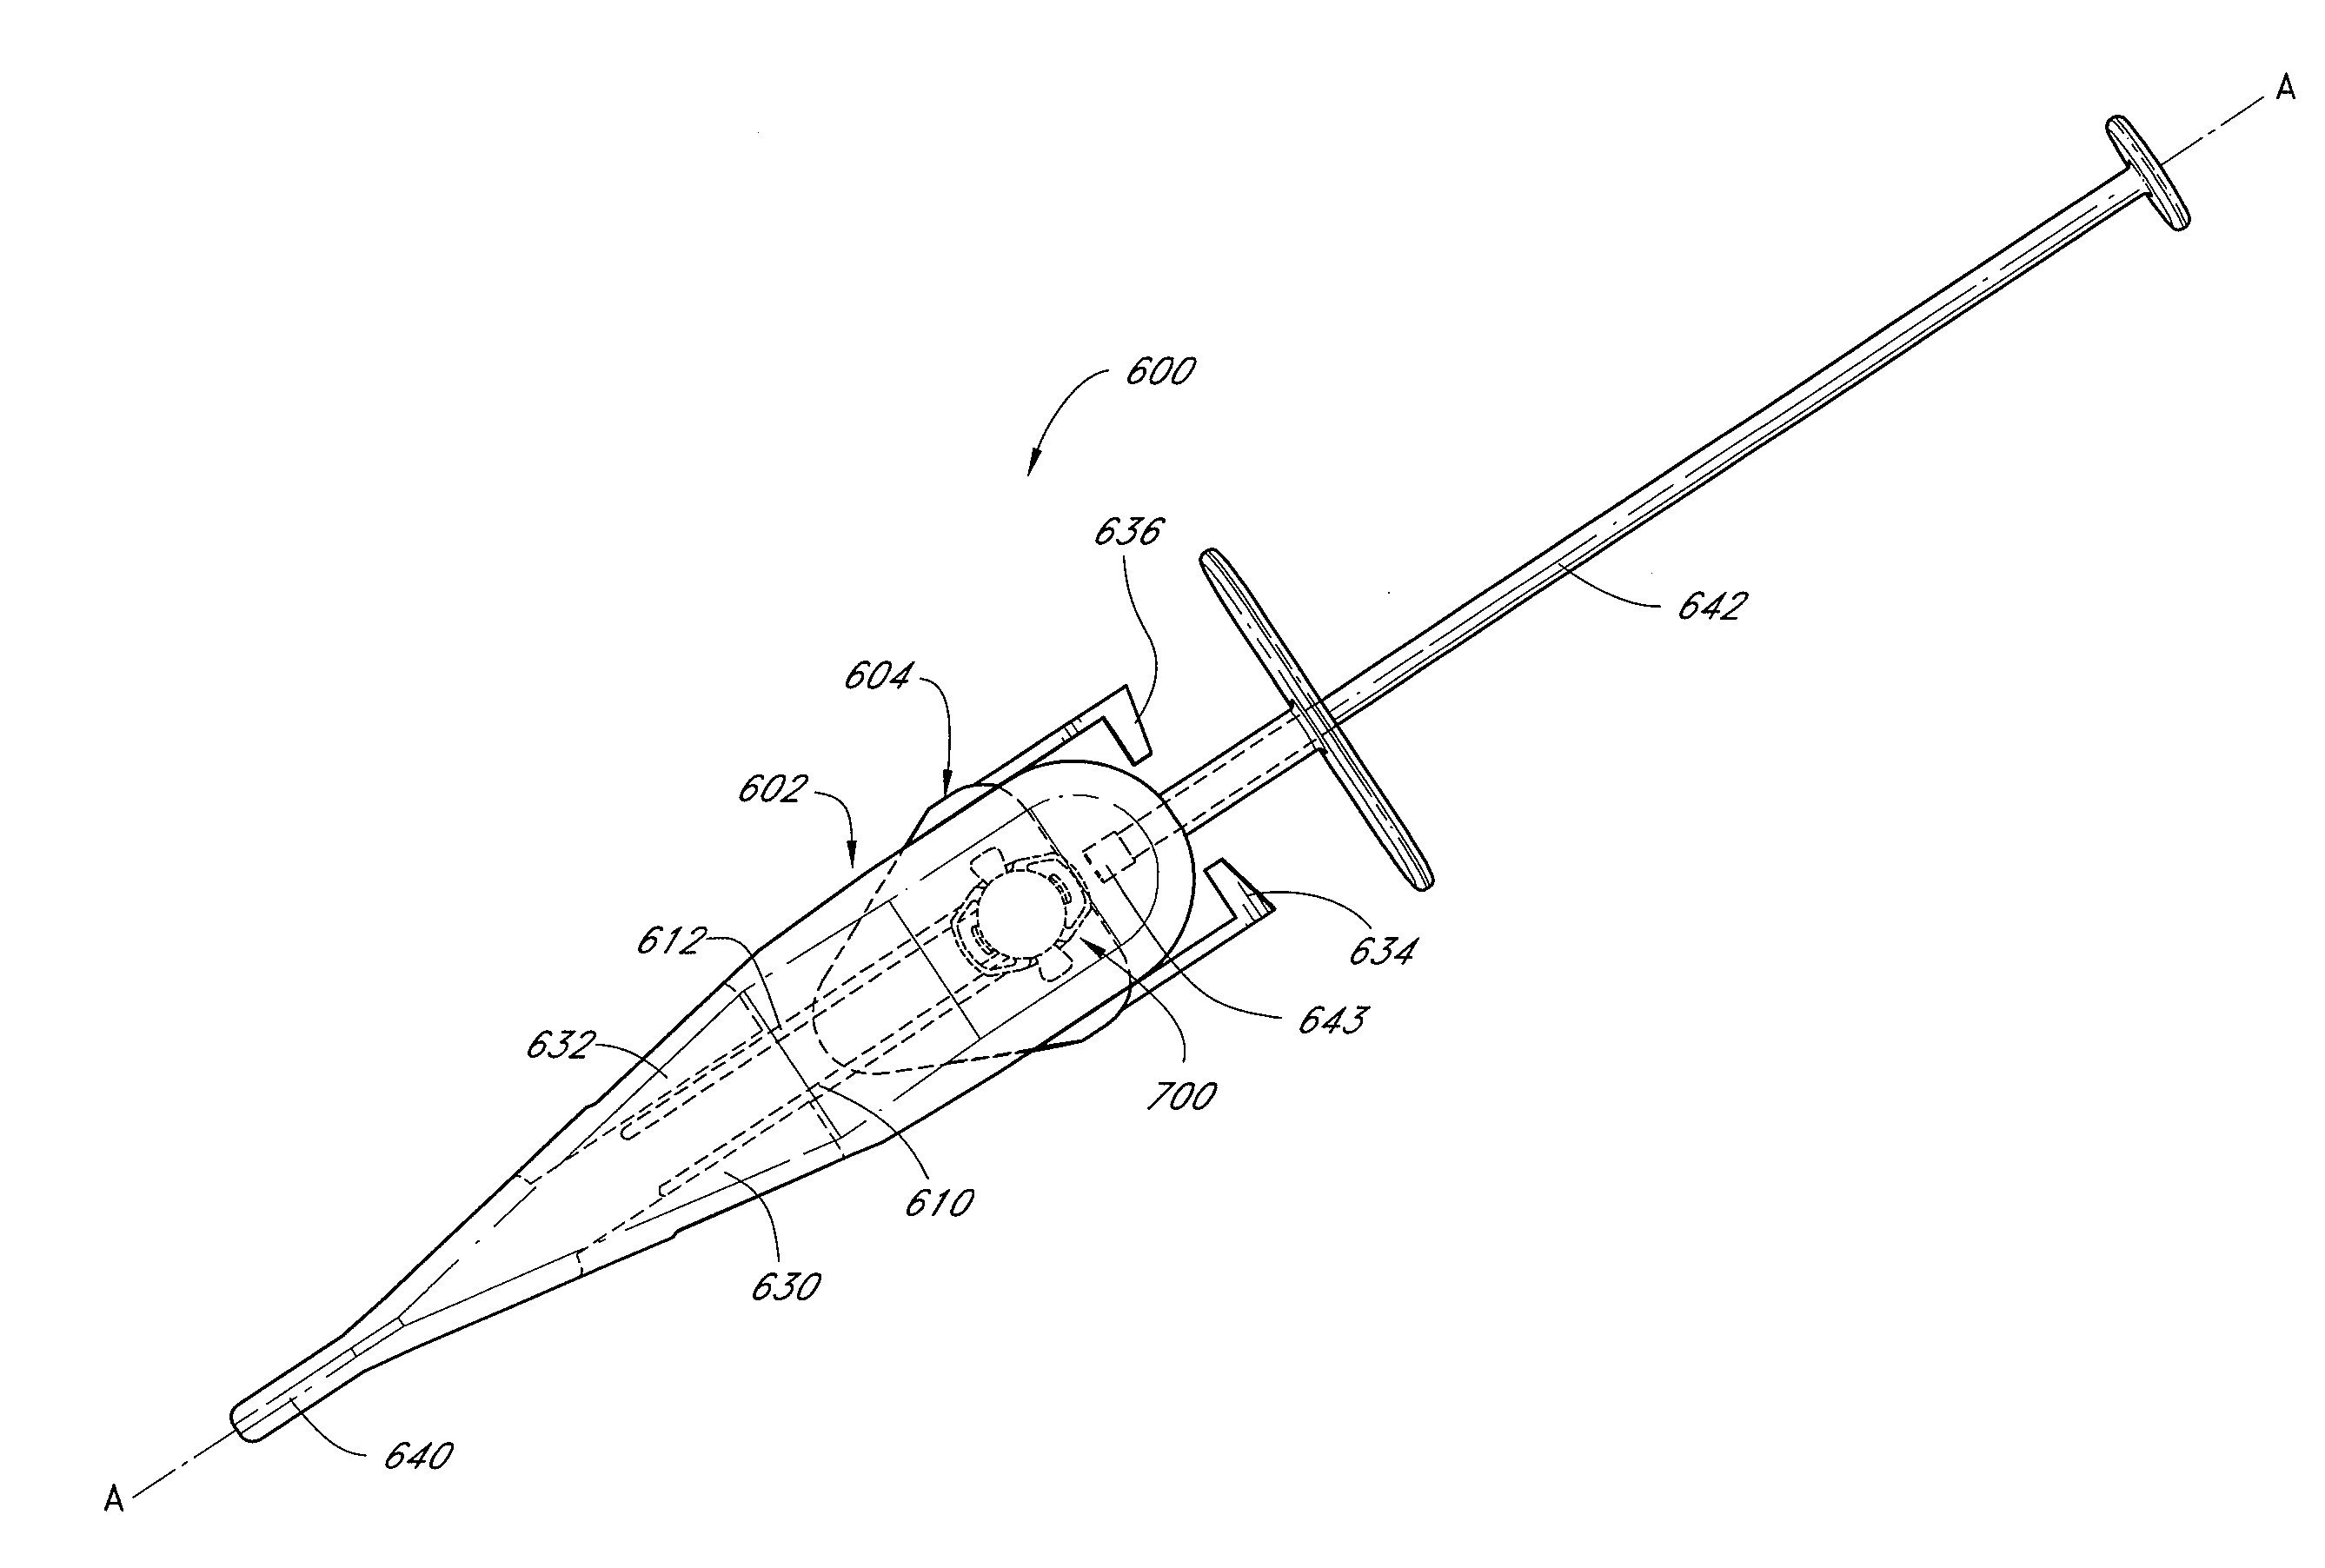 Method and Device for Inserting an Intraocular Lens